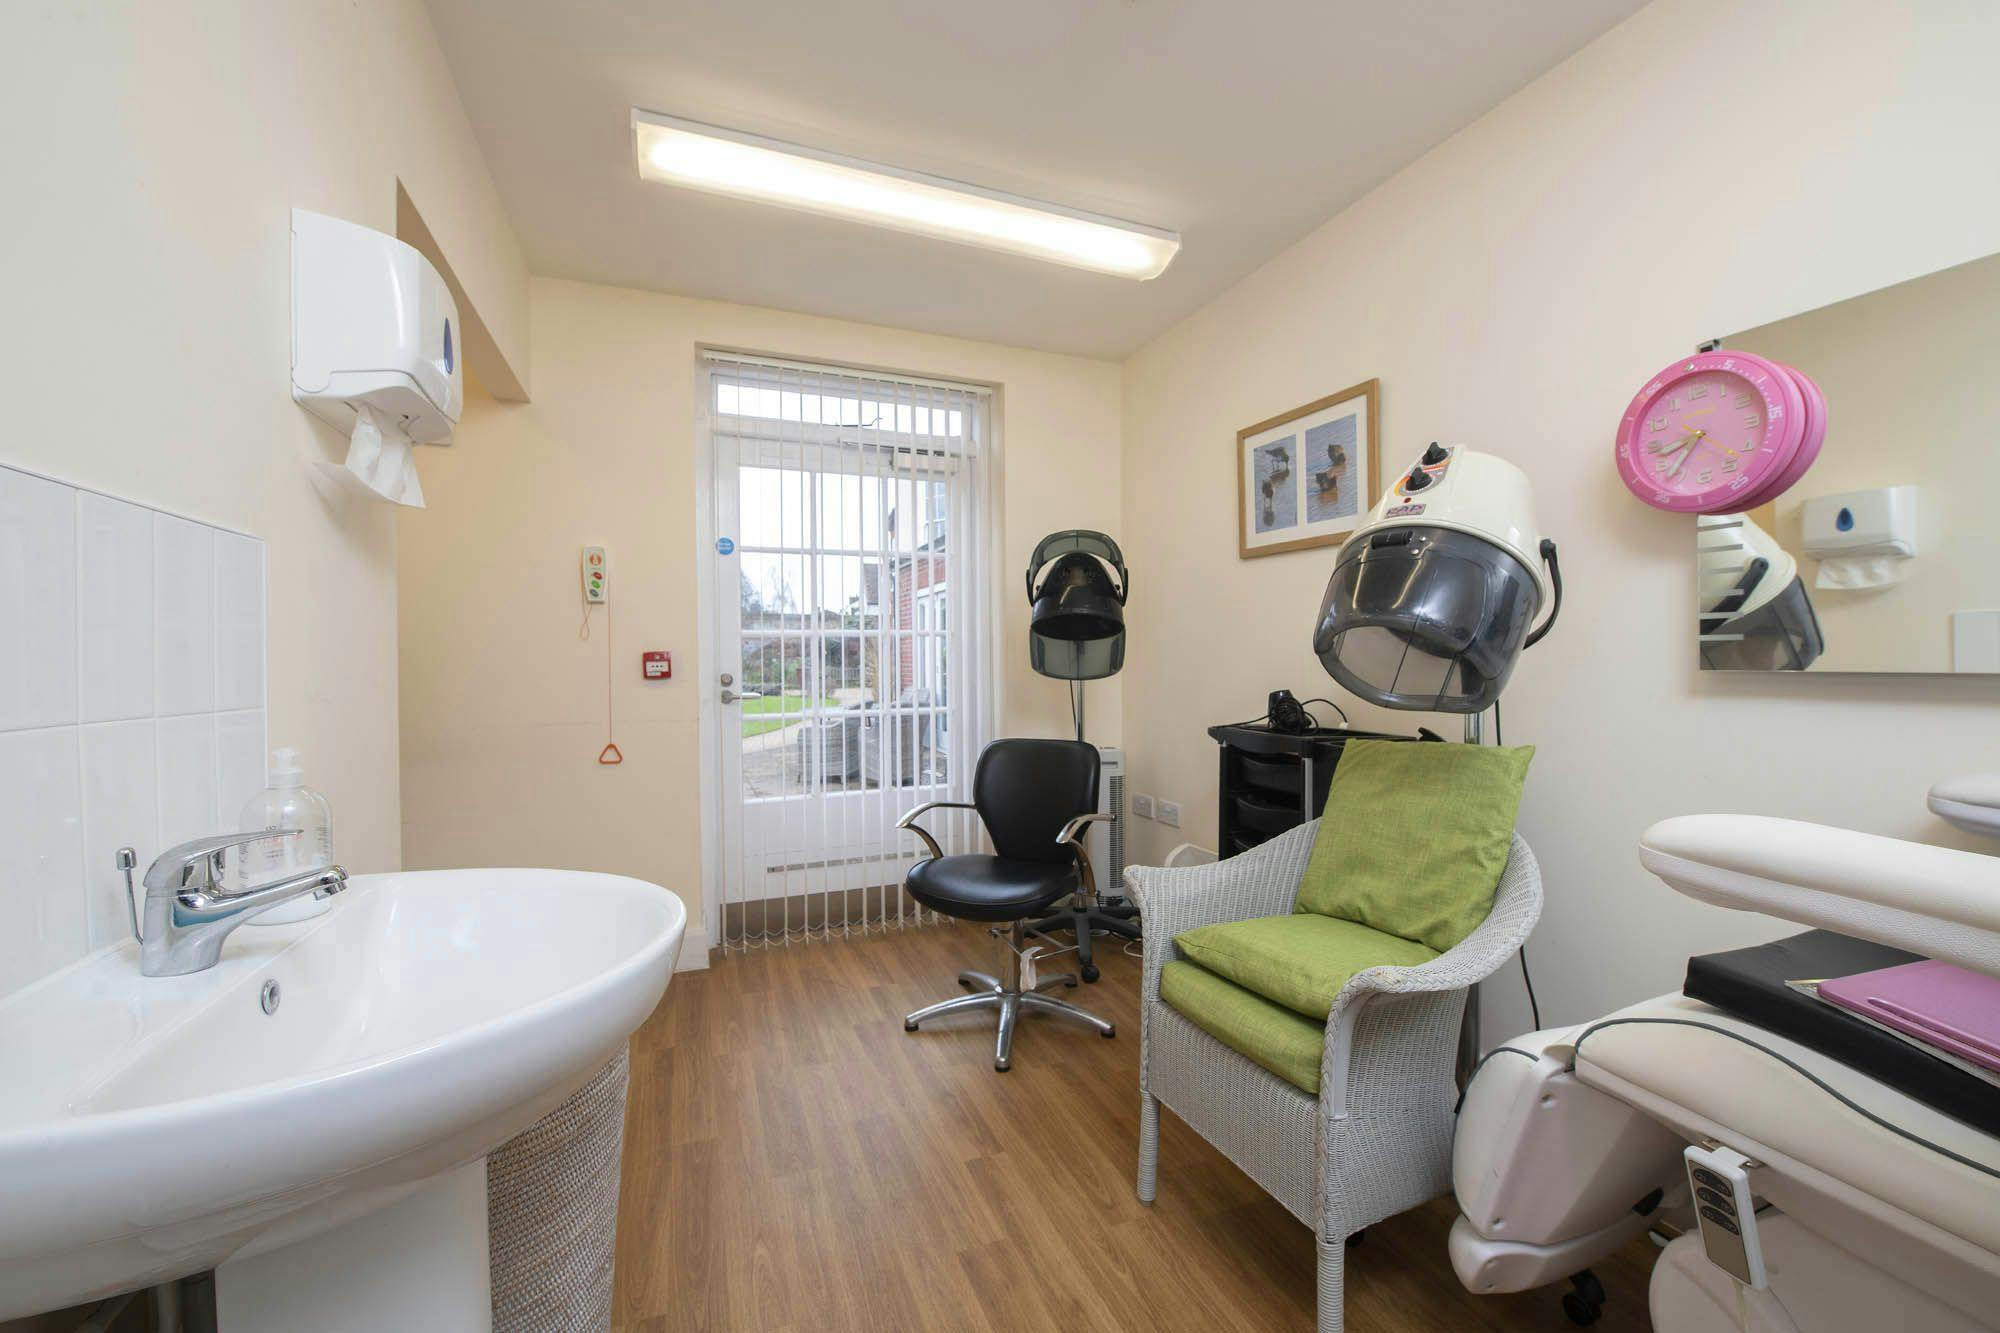  Salon at Manson House Care Home in West Suffolk, Bury St Edmunds